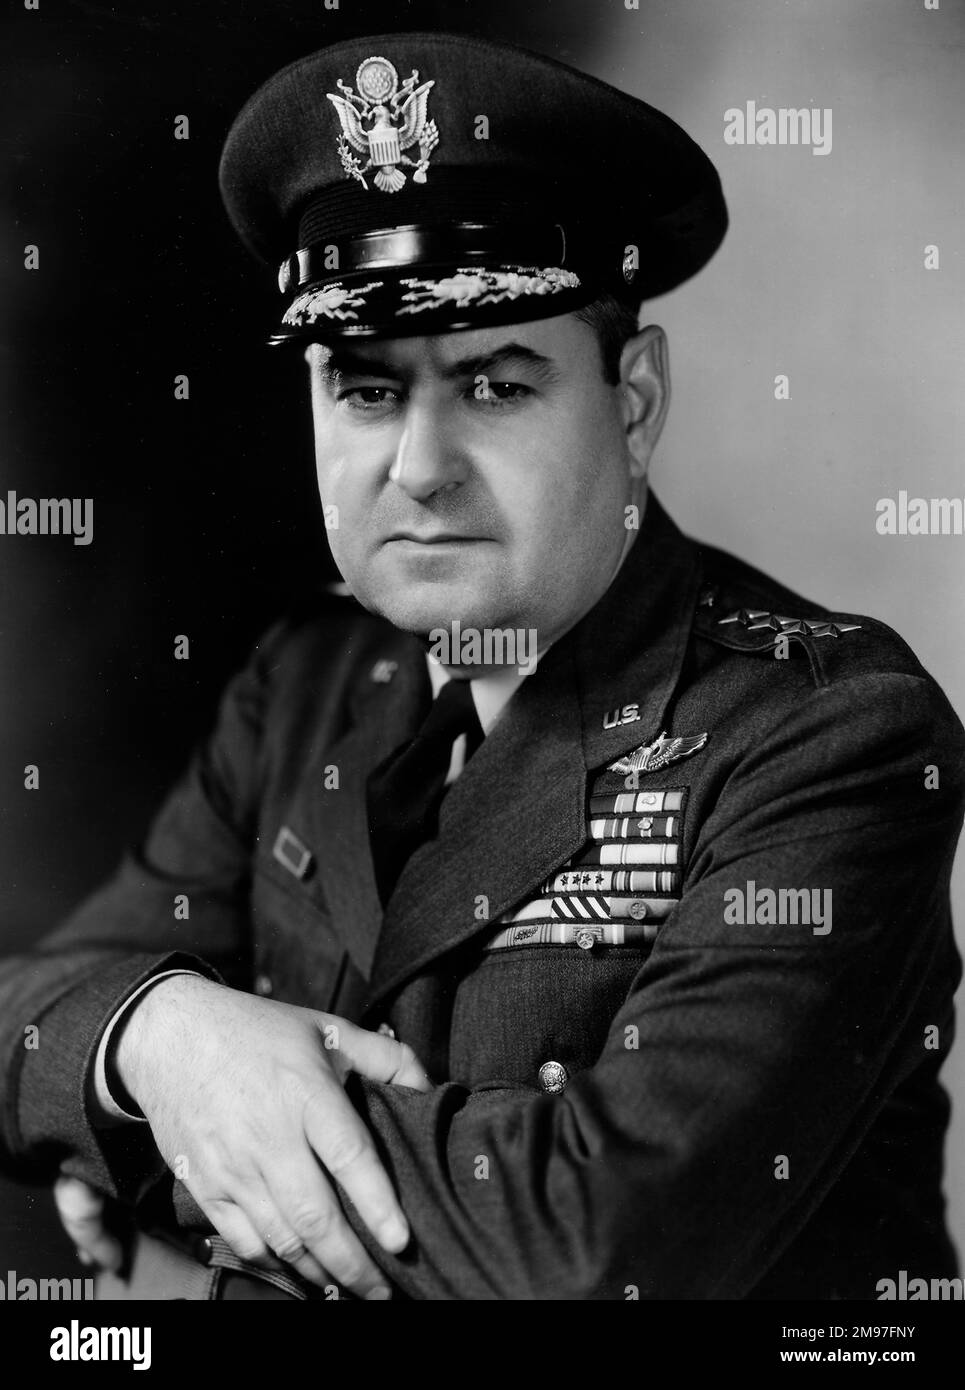 LeMay, Curtis, Pilot and USAAF-USAF General proved himself during WW2, going on to head Strategic Air Command. Stock Photo